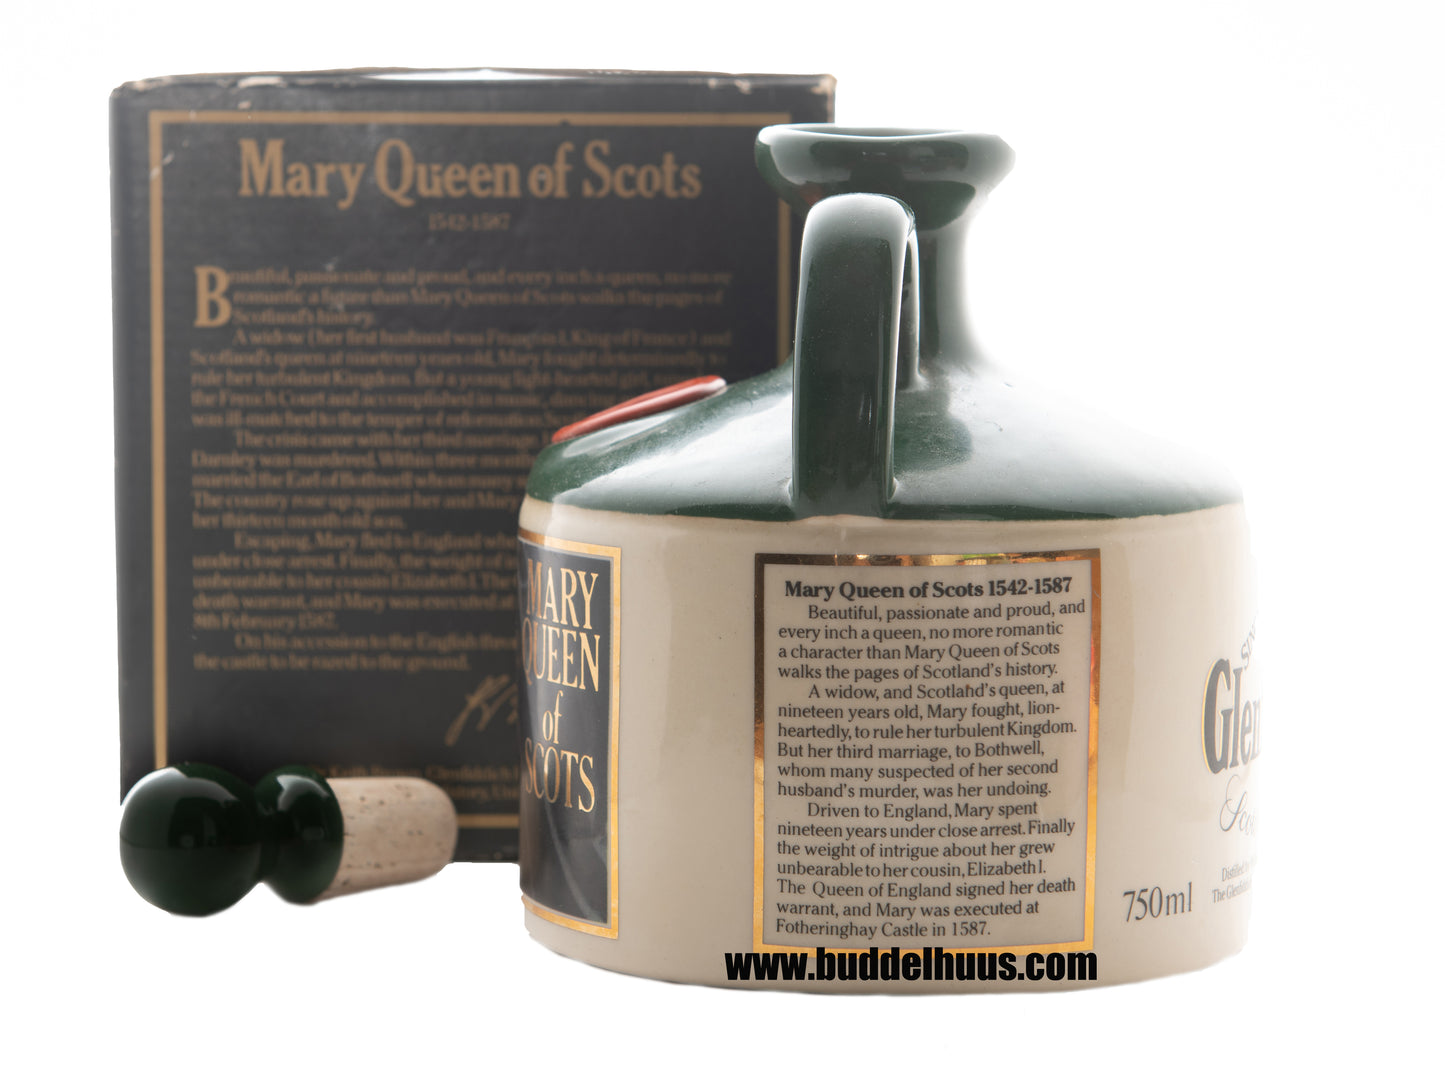 Glenfiddich Mary Queen of Scots Decanter